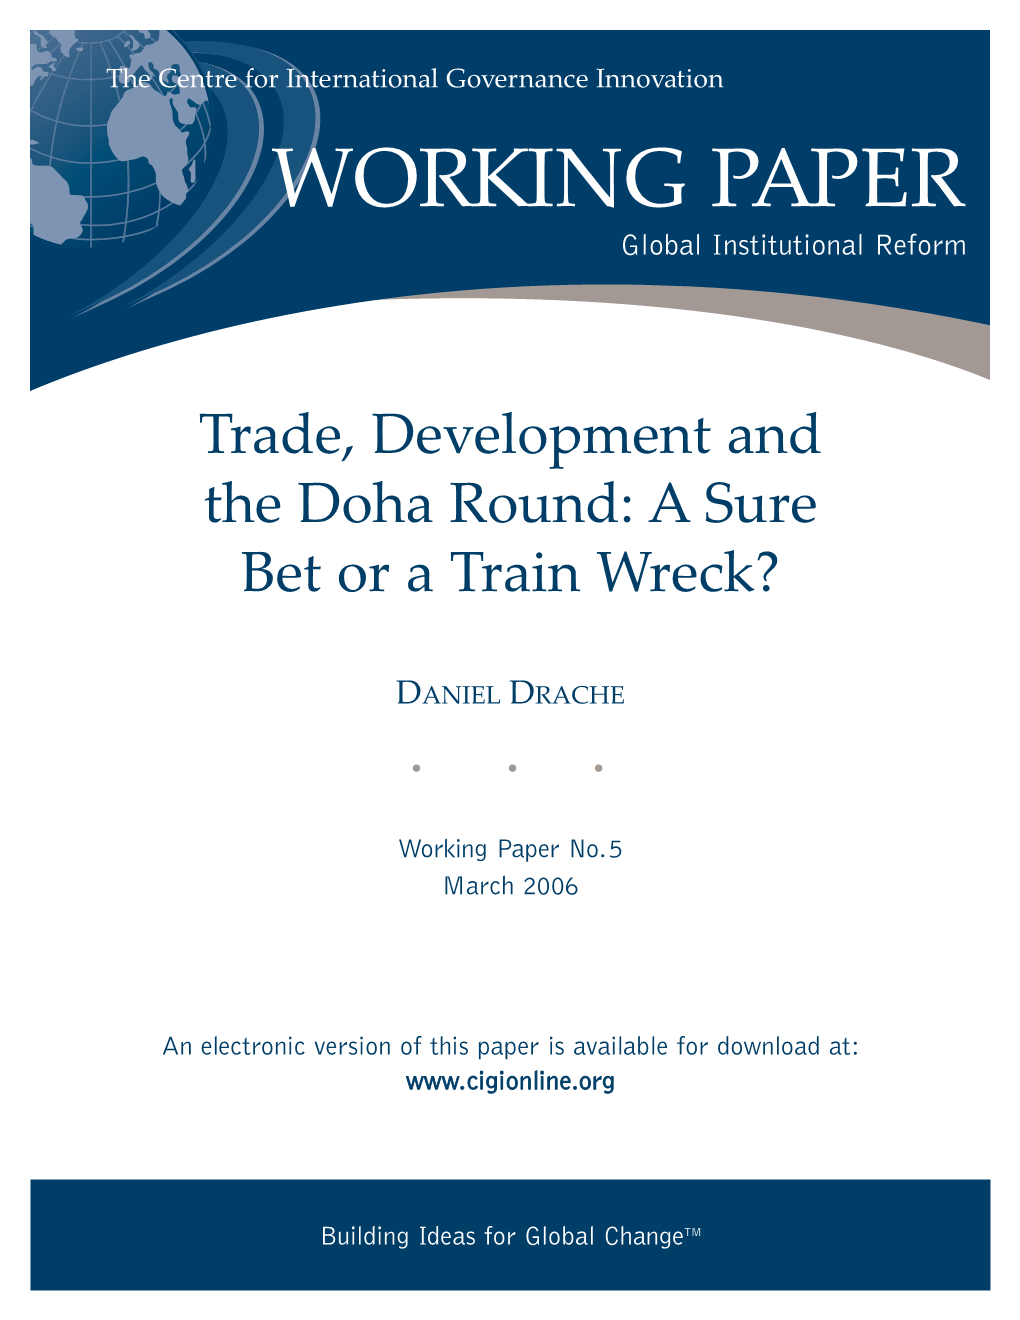 Trade, Development and the Doha Round: a Sure Bet Or a Train Wreck?